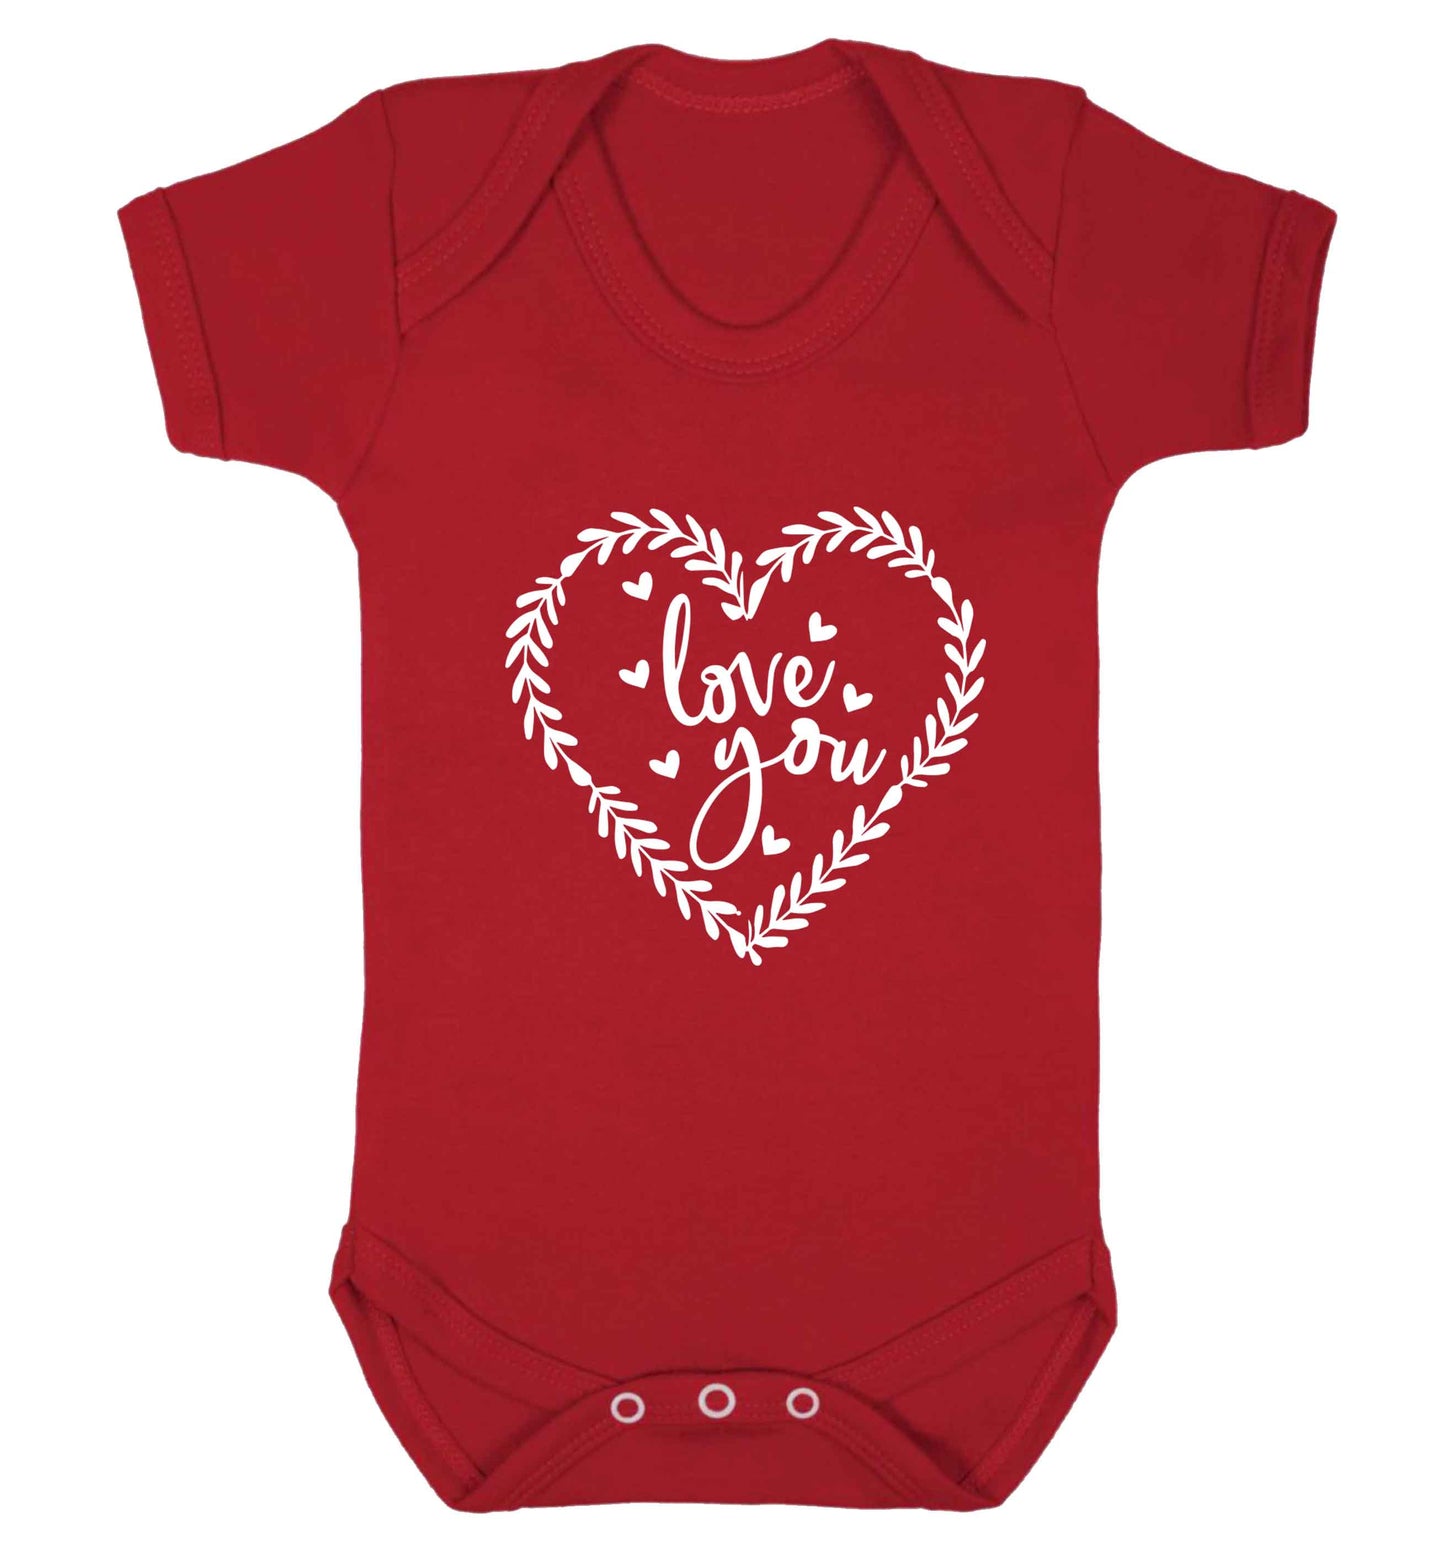 Love you baby vest red 18-24 months